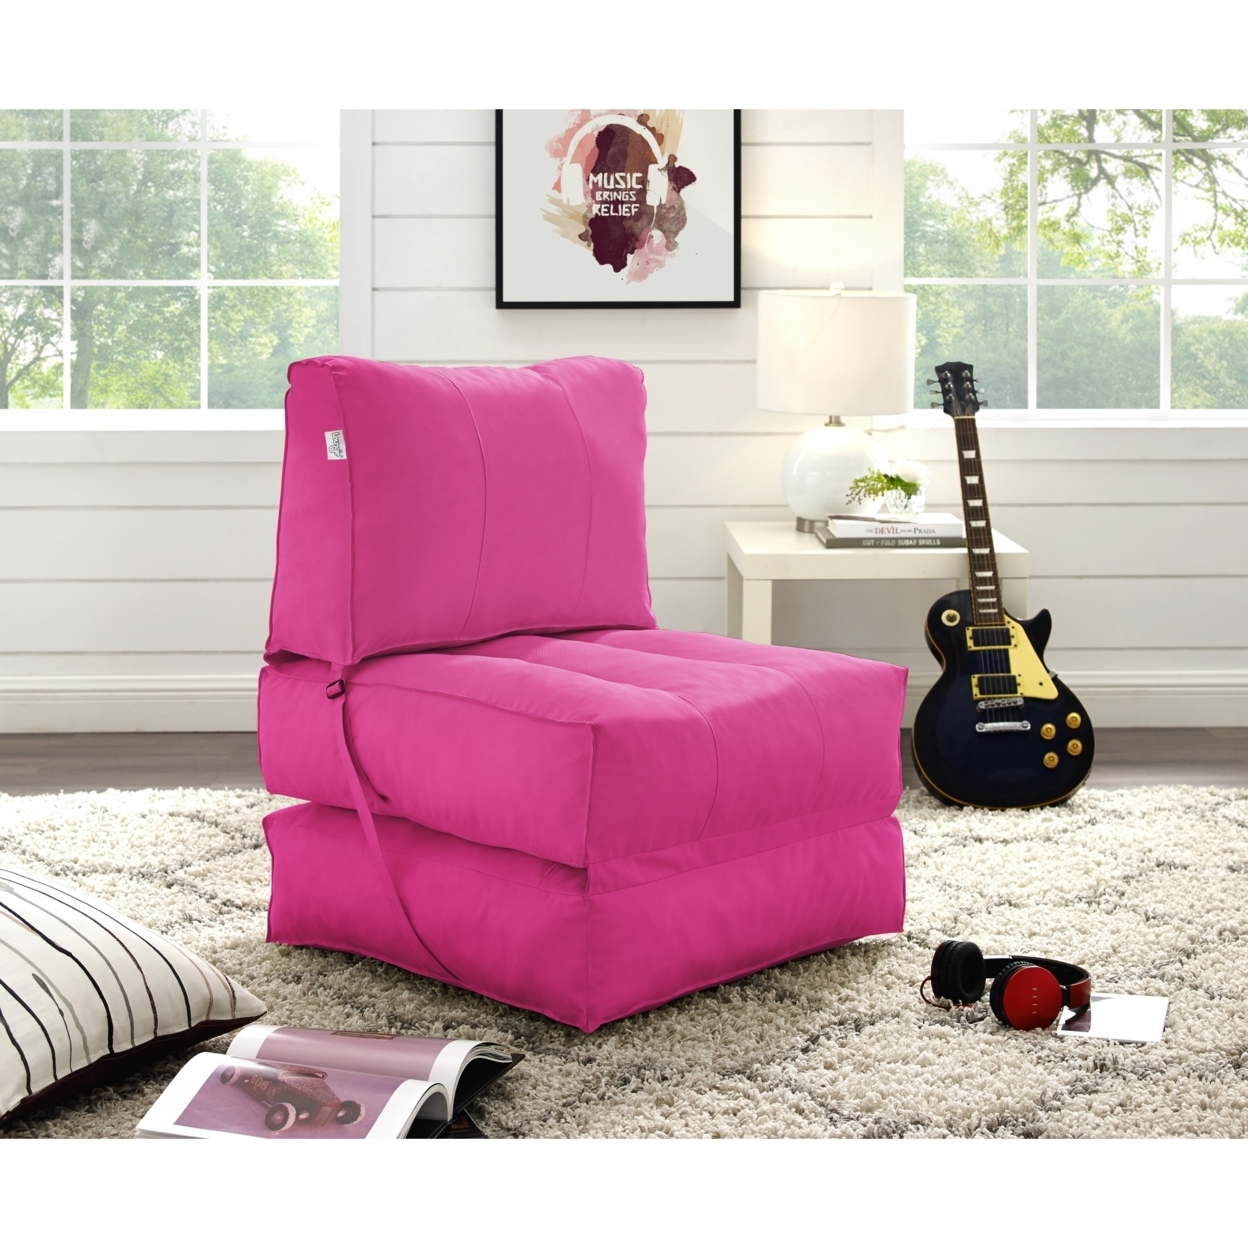 Loungie Cloudy Foam Lounge Chair-Convertible Bean Bag-Indoor- Outdoor-Self Expanding-Water Resistant - Fuchsia - pink